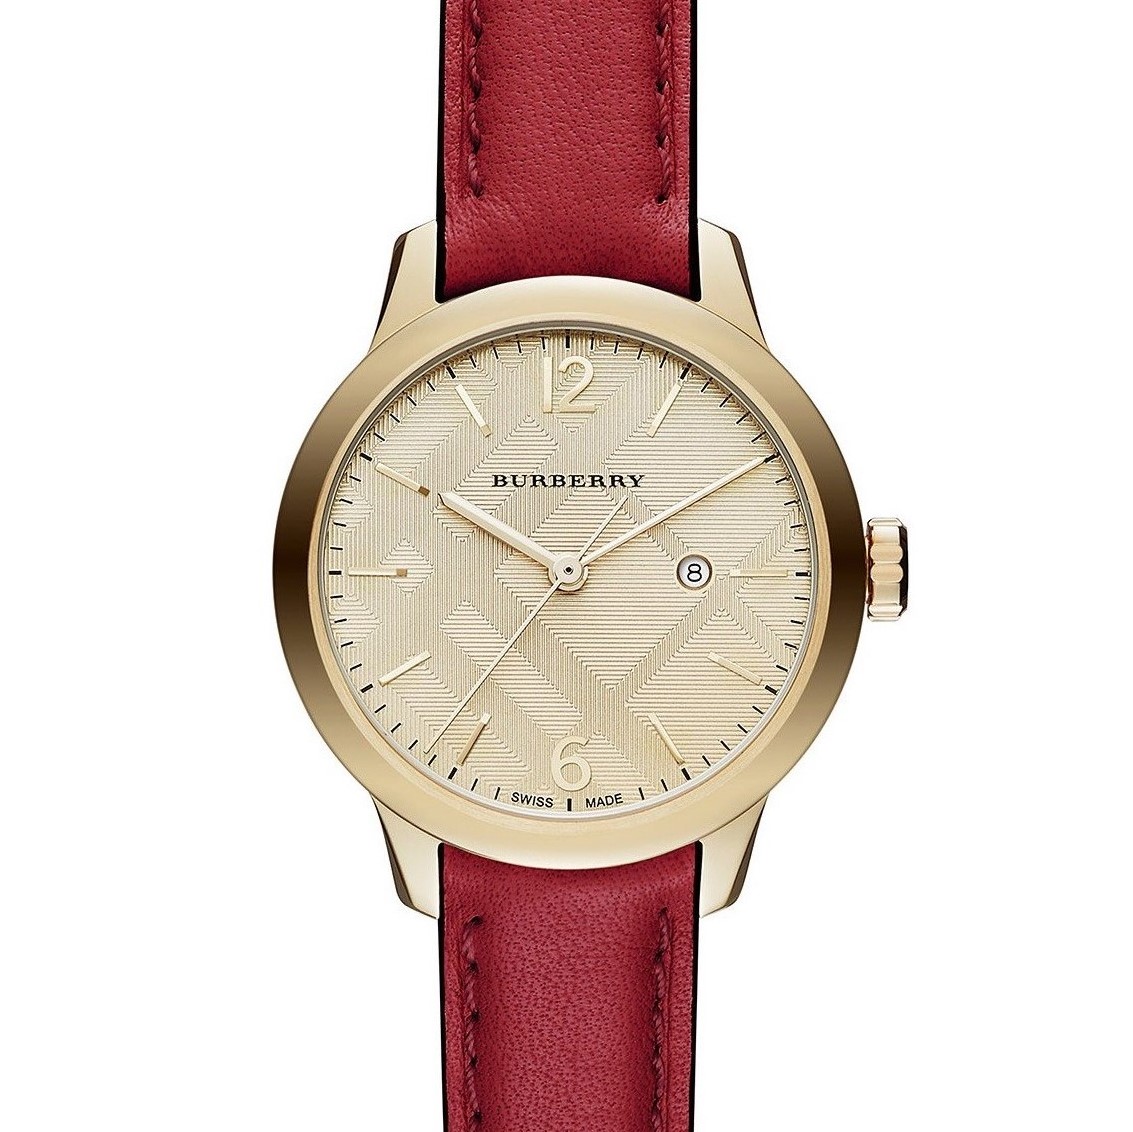 ĐỒNG HỒ NỮ BURBERRY THE CLASSIC ROUND RED LEATHER STRAP LADIES WATCH BU10102 9